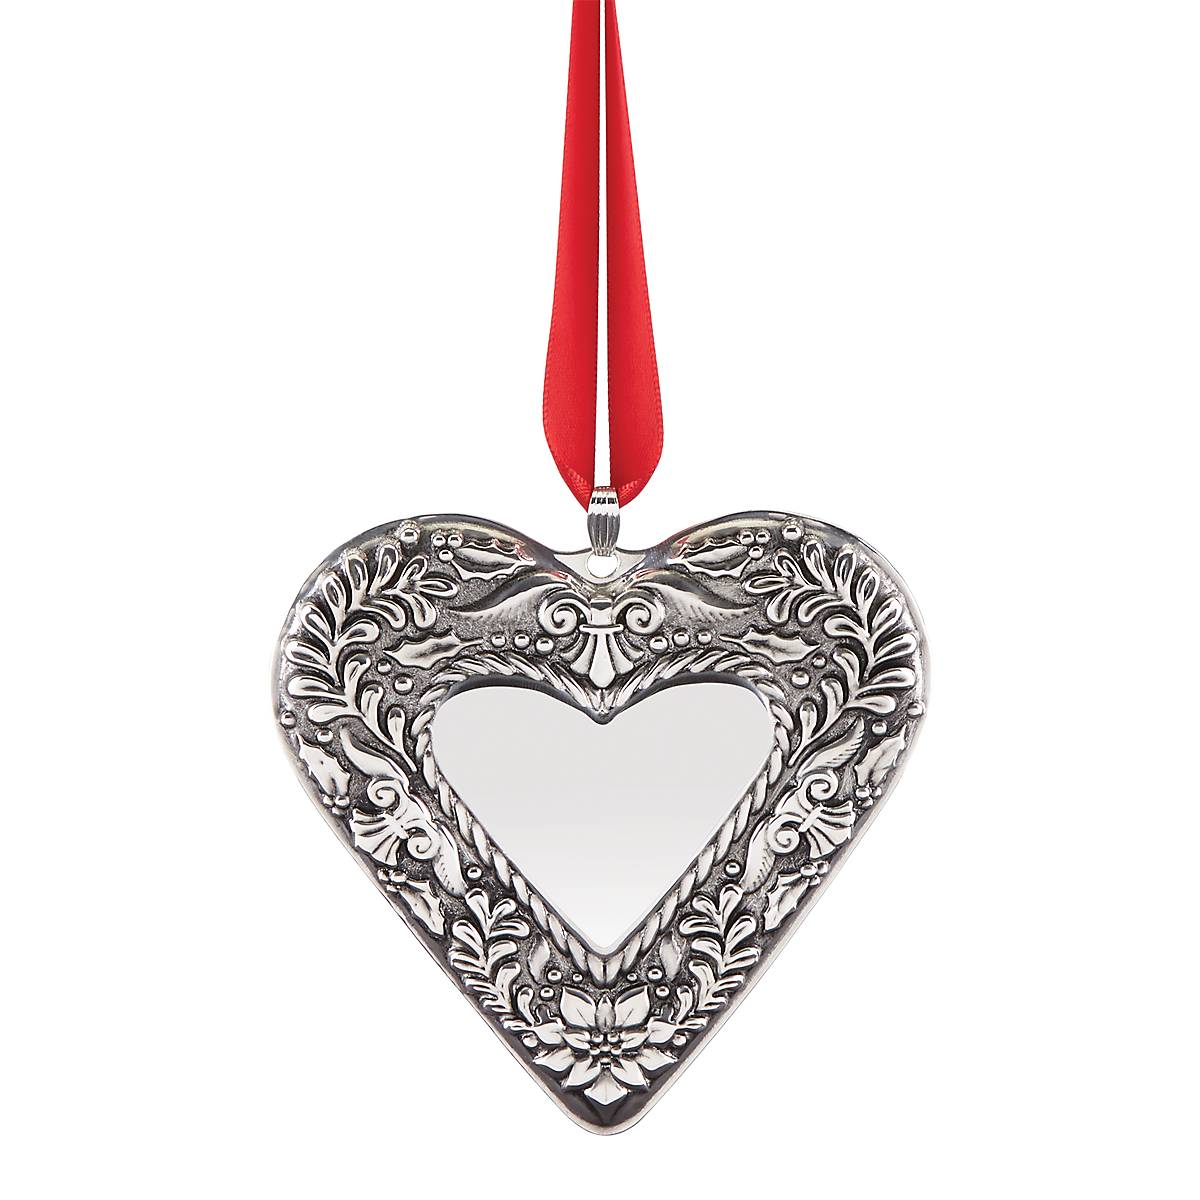 Reed and Barton Best of The Season Heart Ornament-1St Edition Metallic 0.50 LB 